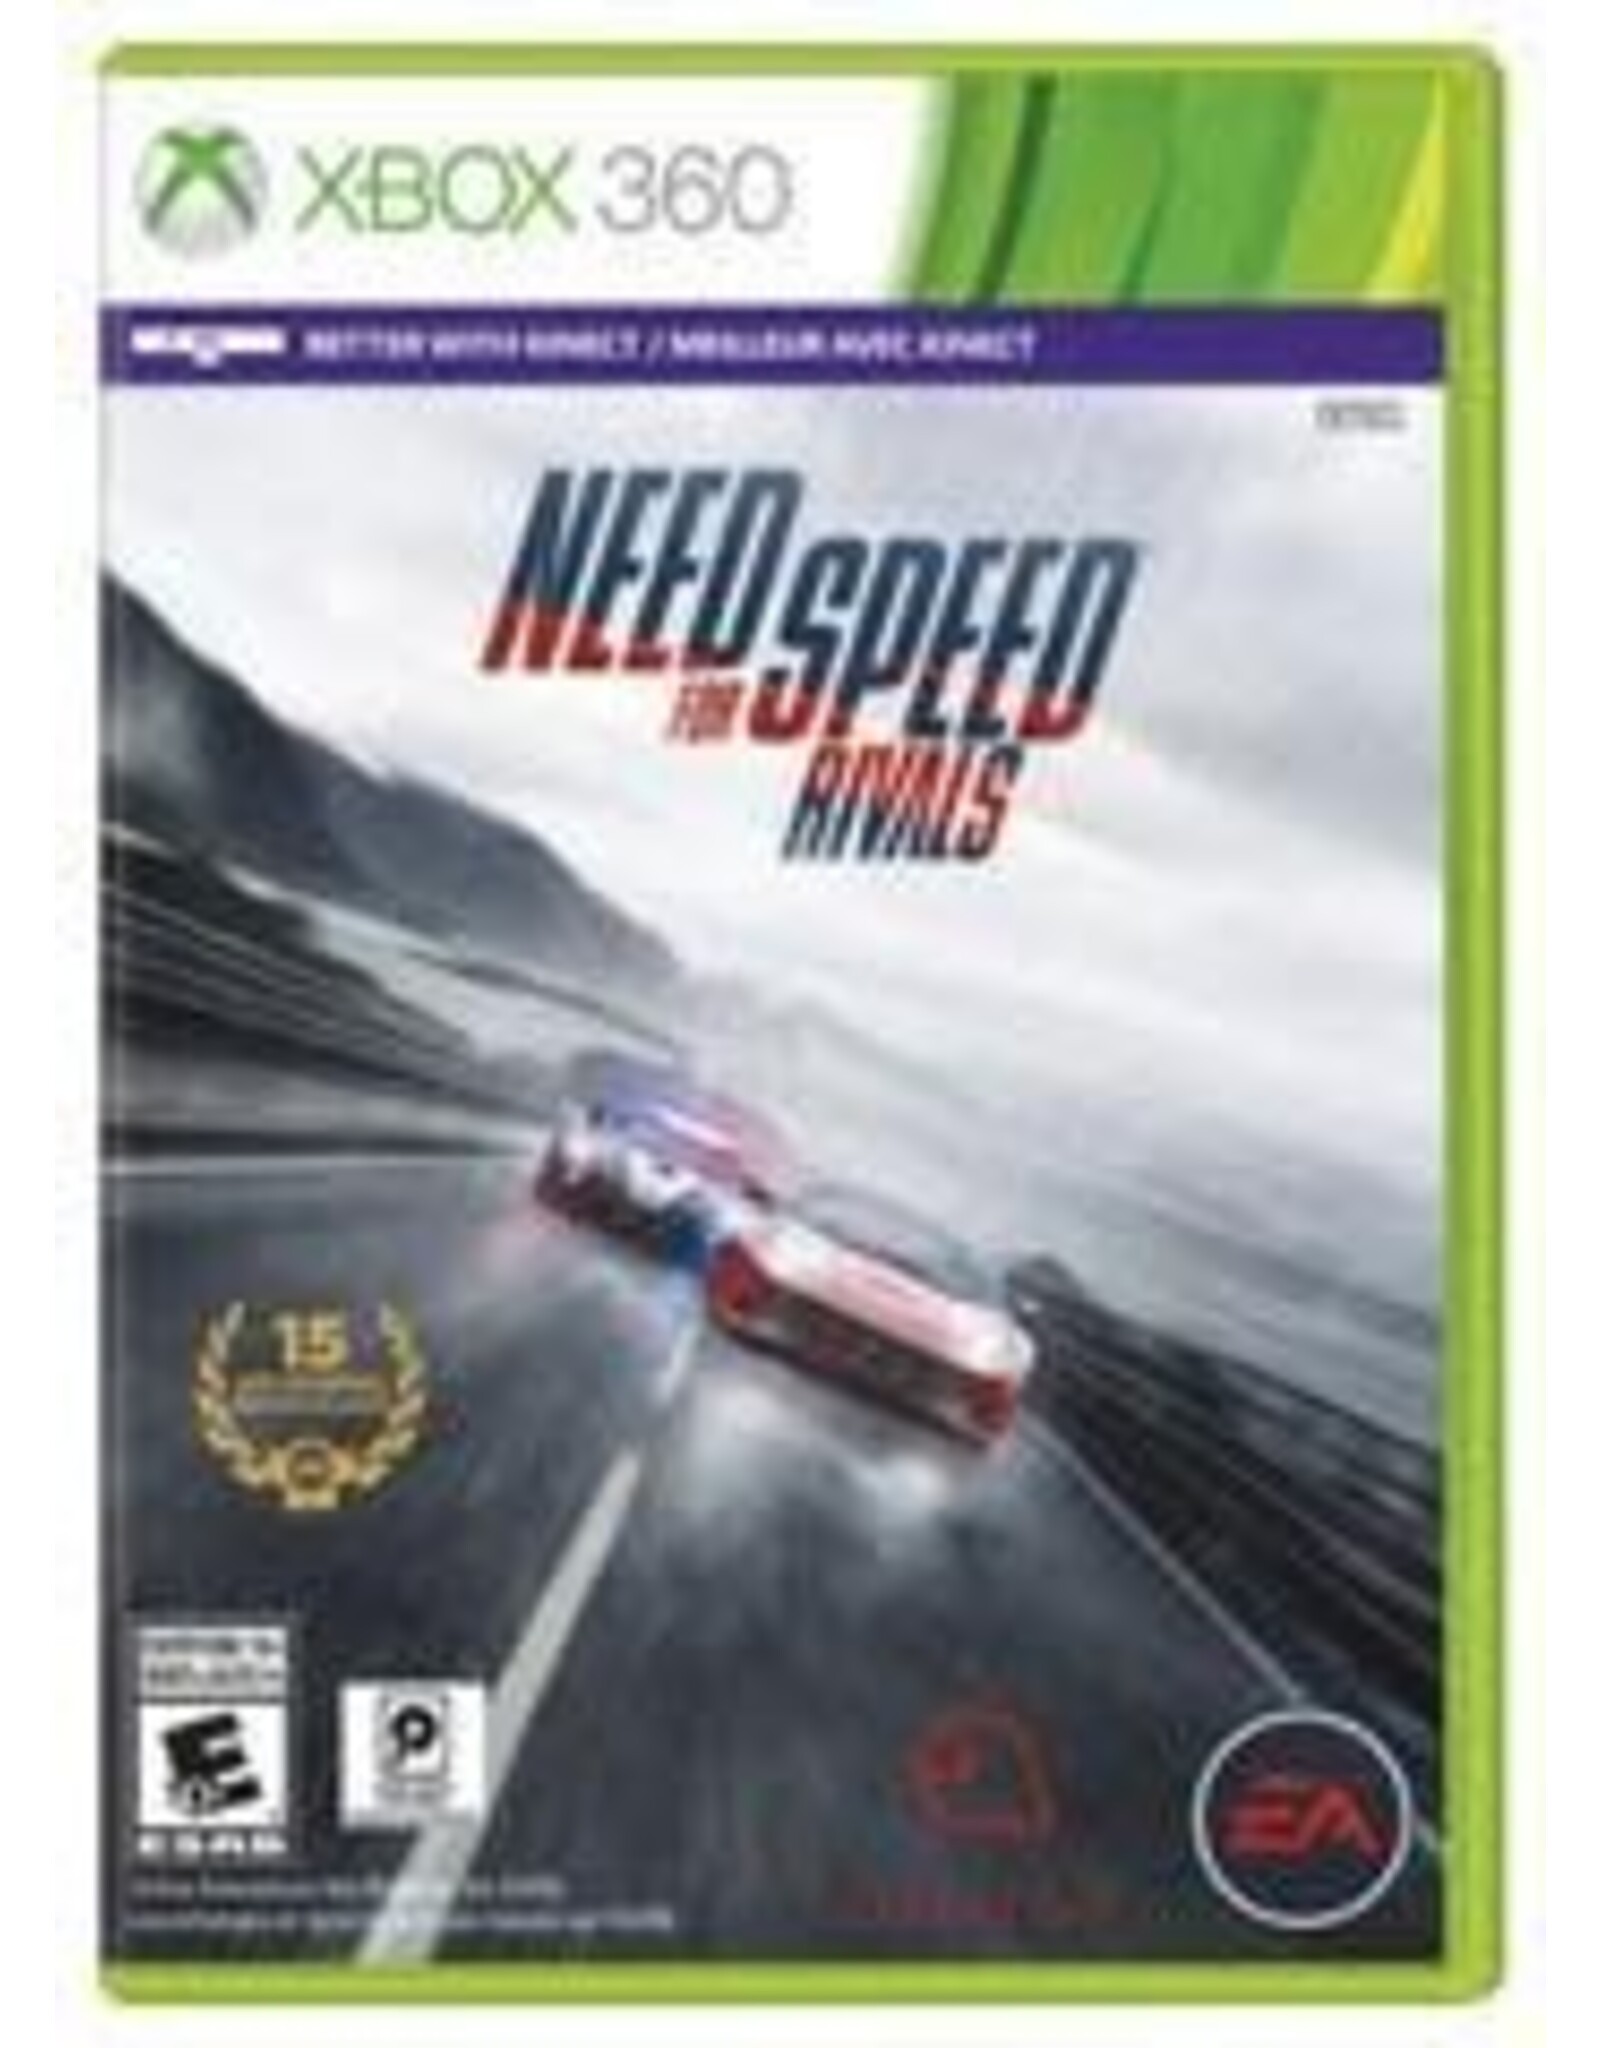 Xbox 360 Need for Speed Rivals (No Manual)